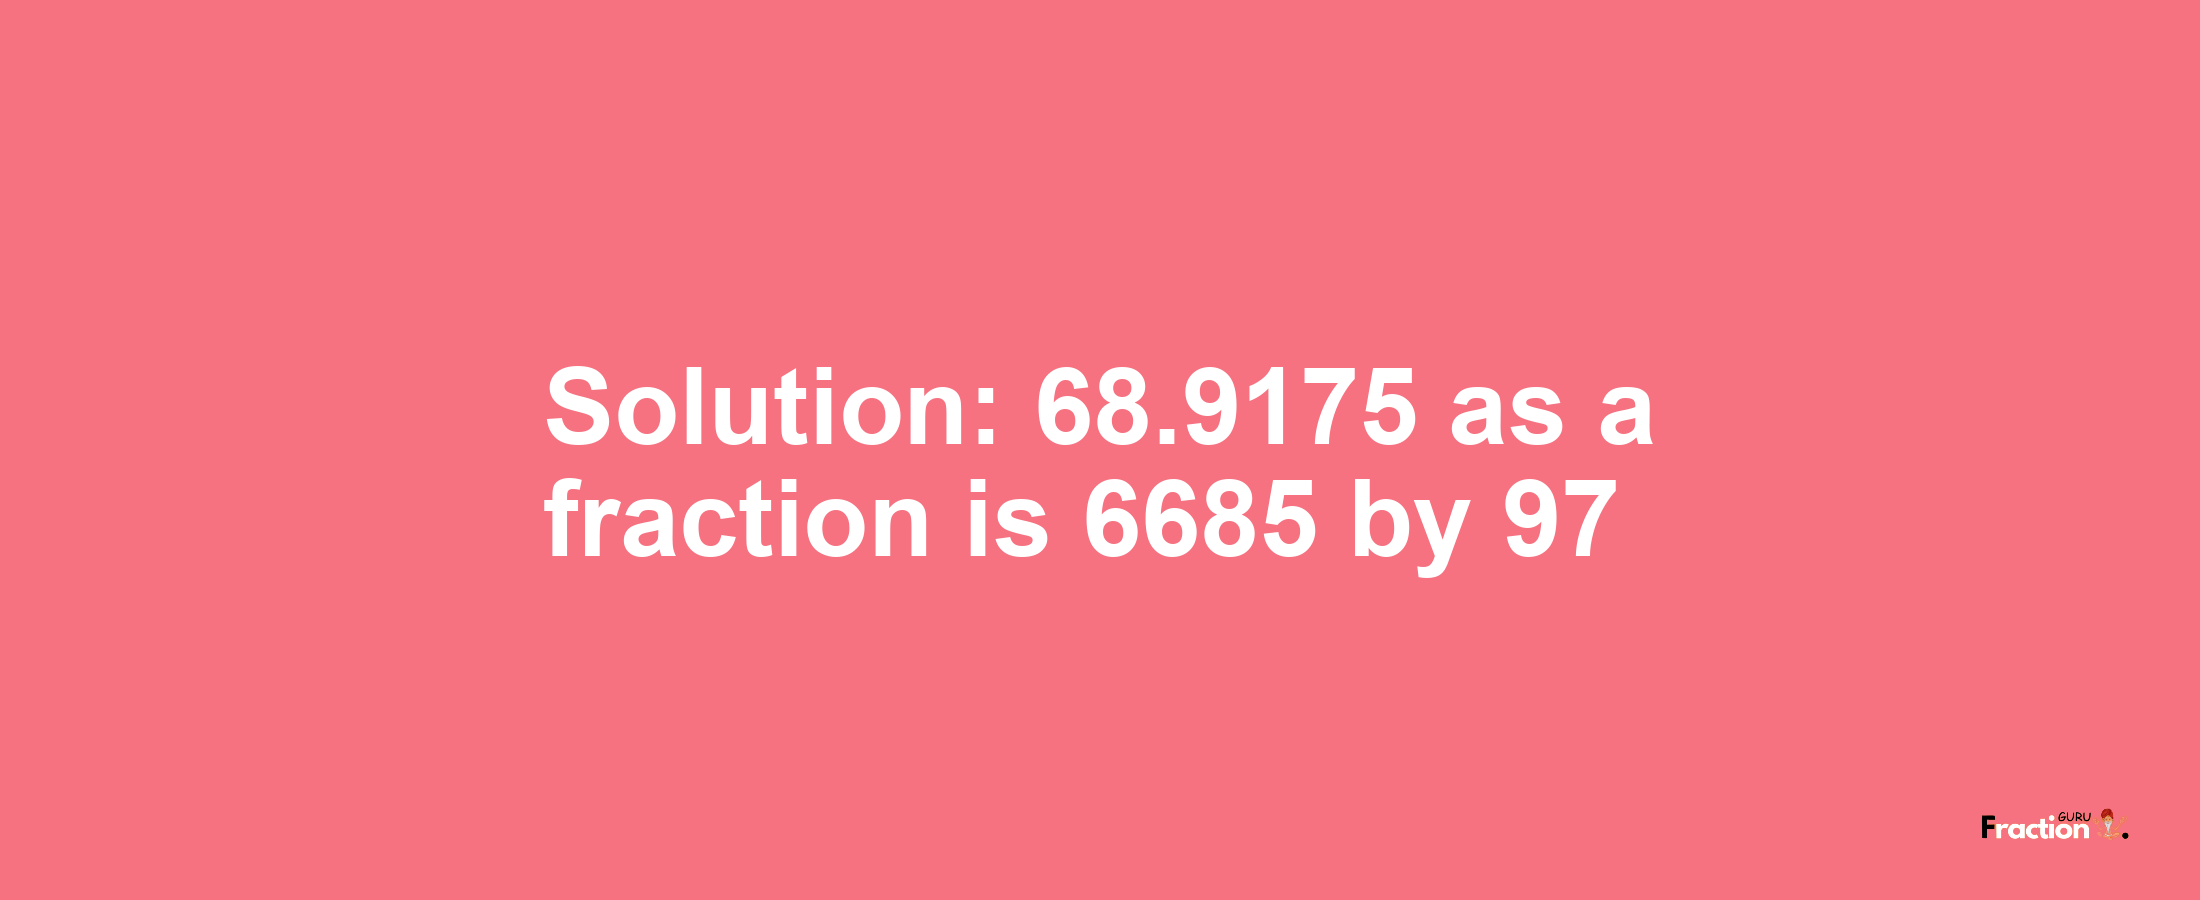 Solution:68.9175 as a fraction is 6685/97